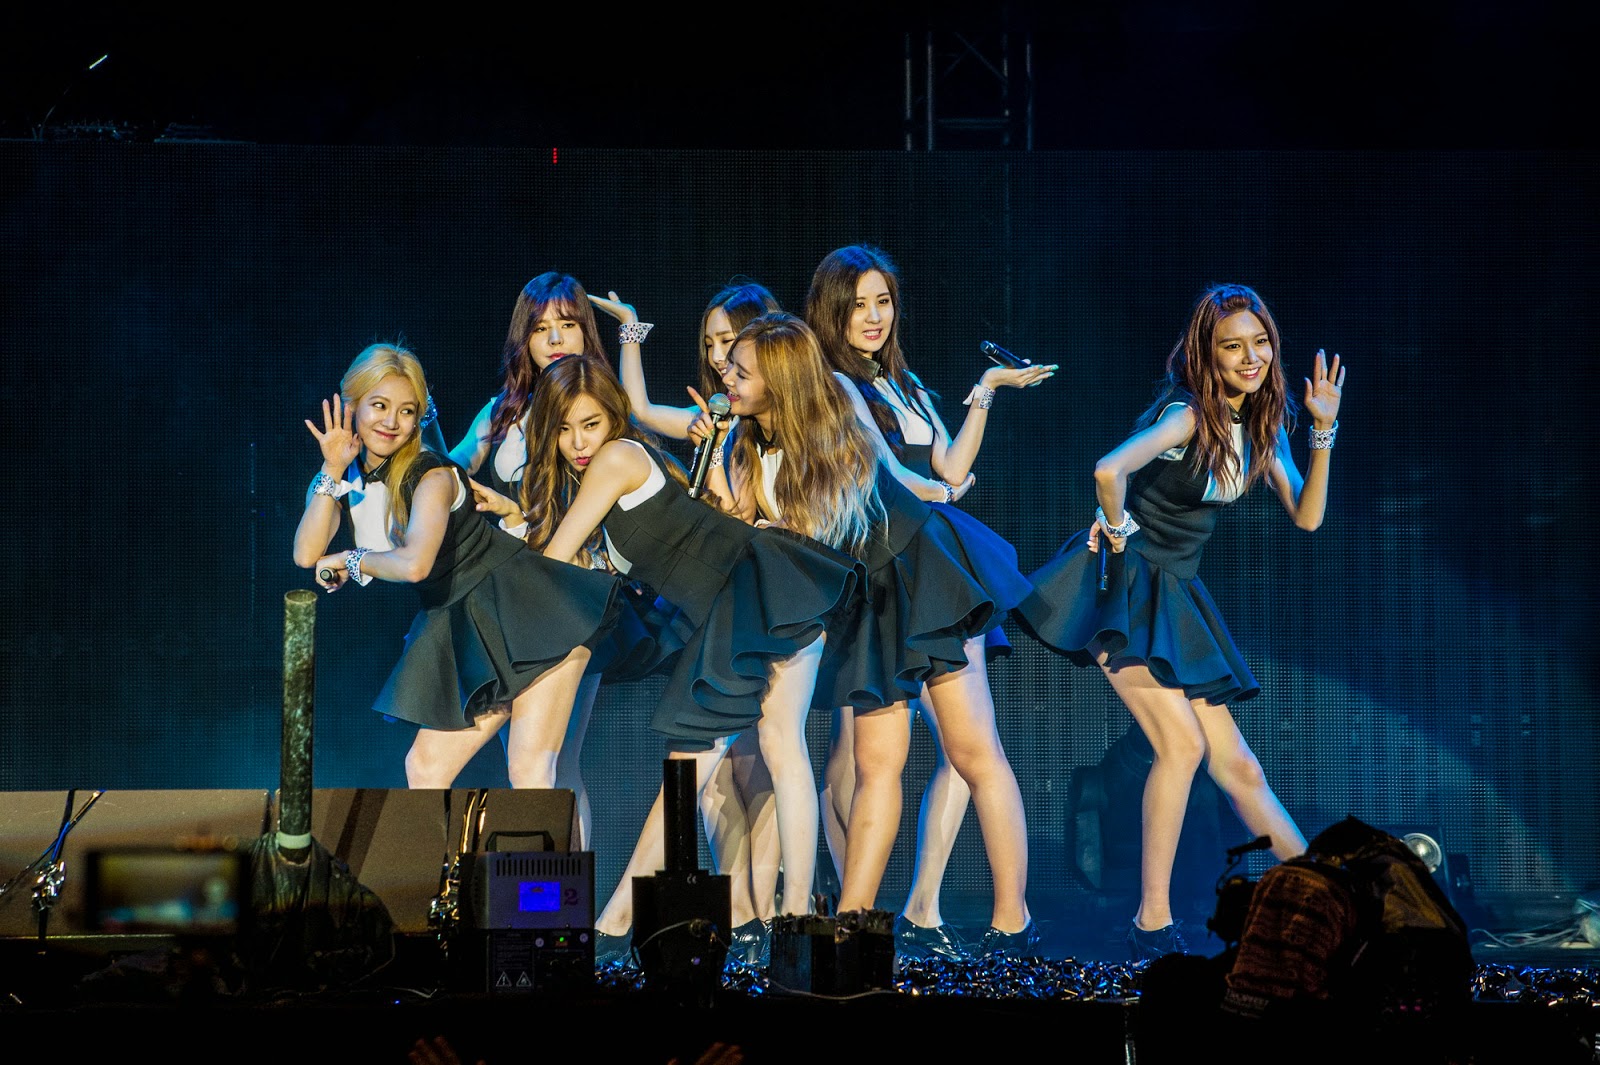 [Coverage] F1 2015 Post Race Concert in Sepang Malaysia (Featuring SNSD and SHINee)